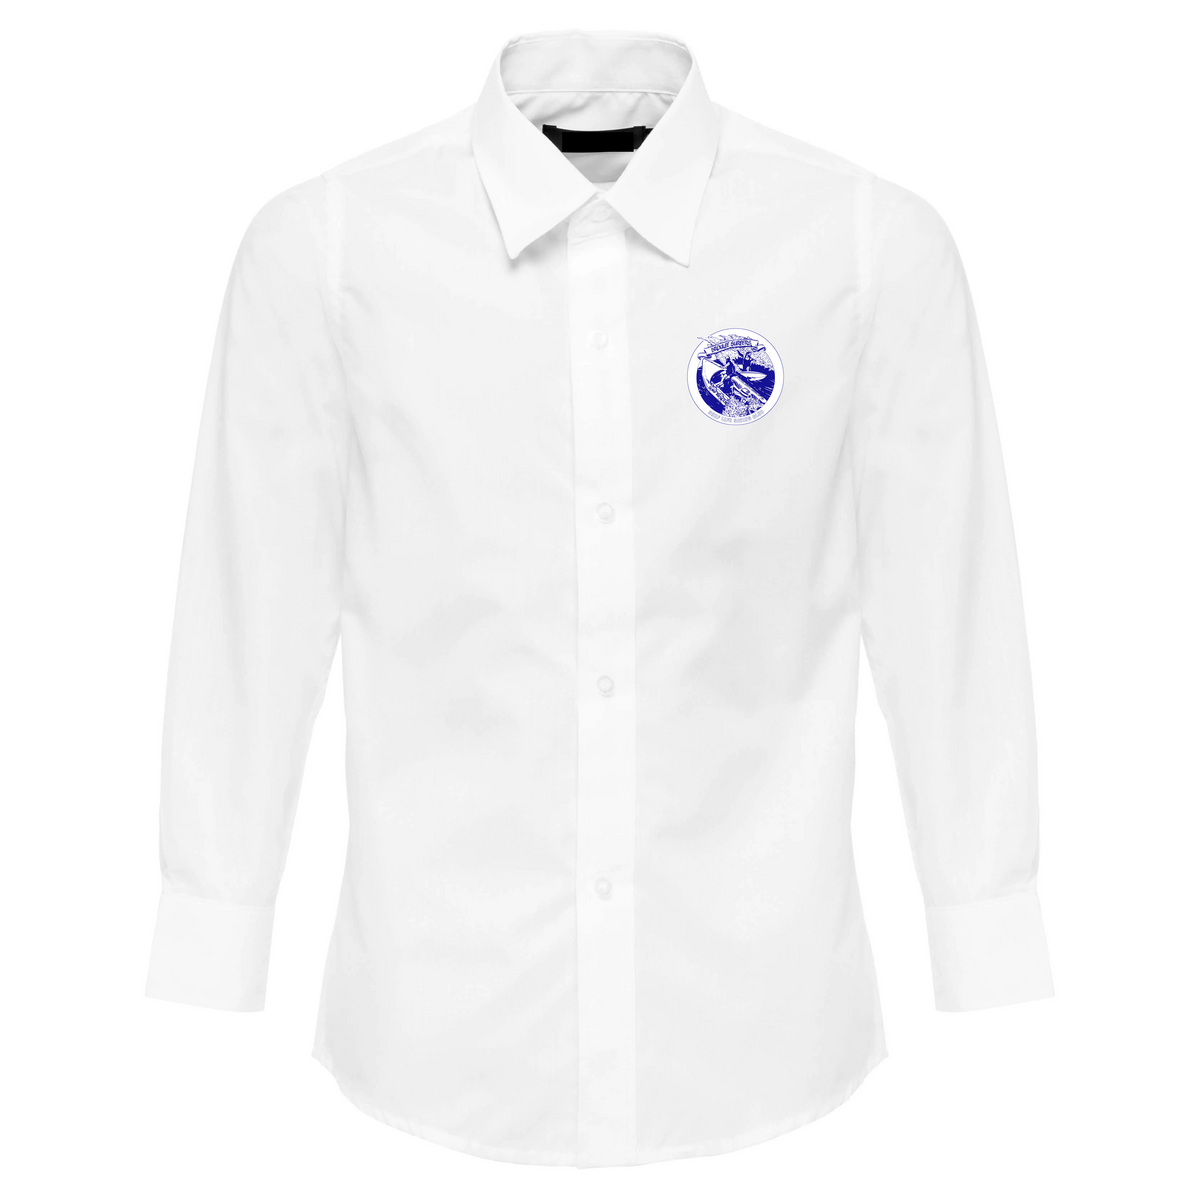 Broulee SLSC Button Up Shirt